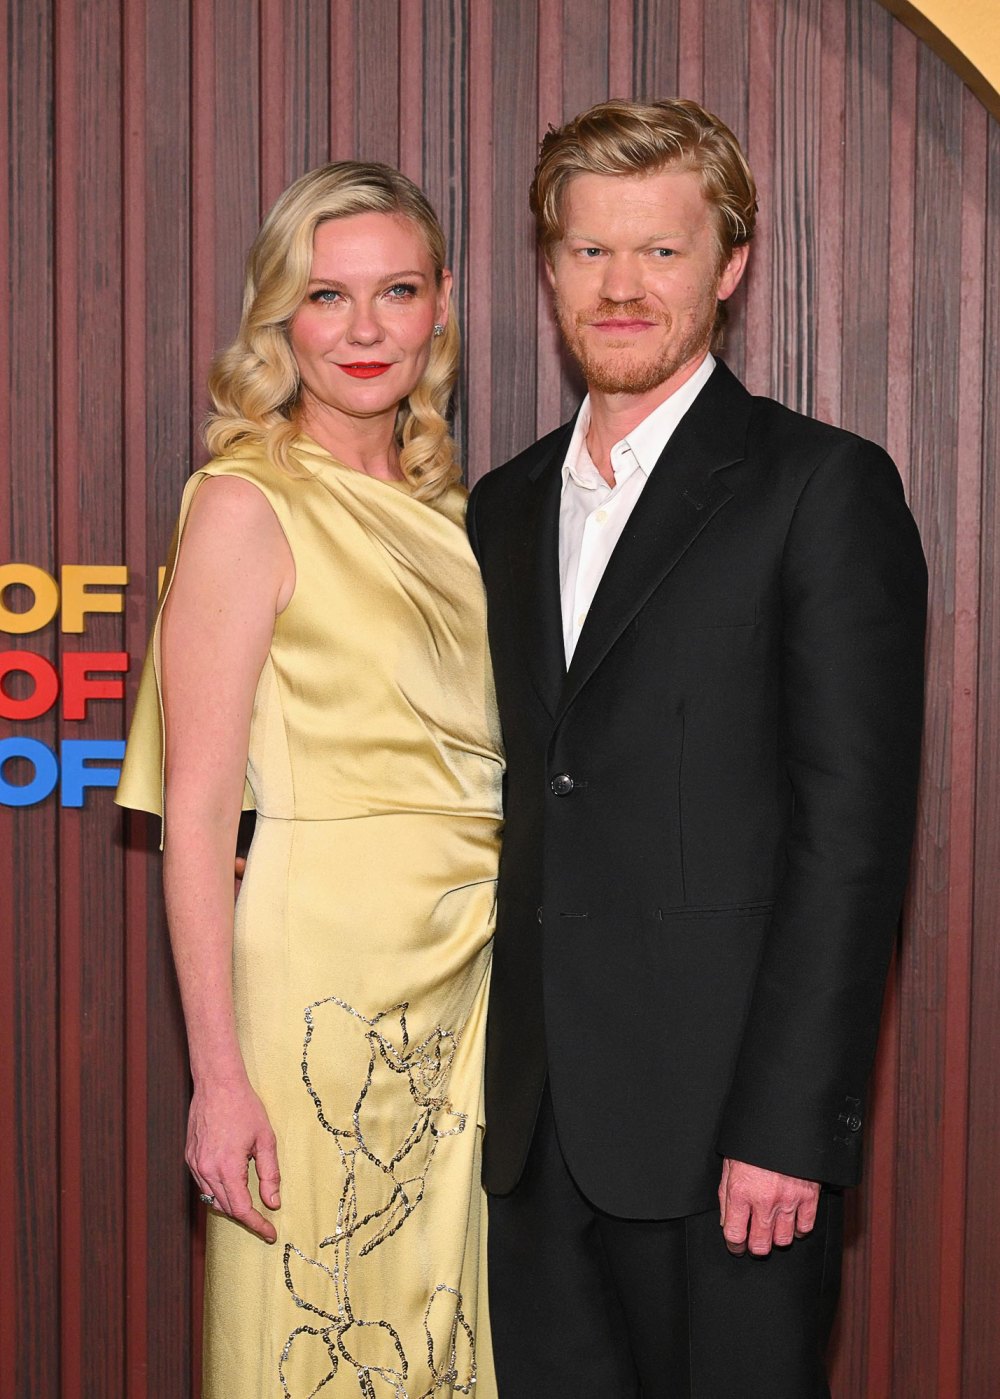 Jesse Plemons has a lot more energy since losing 50 pounds, shares motivation behind weight loss 845